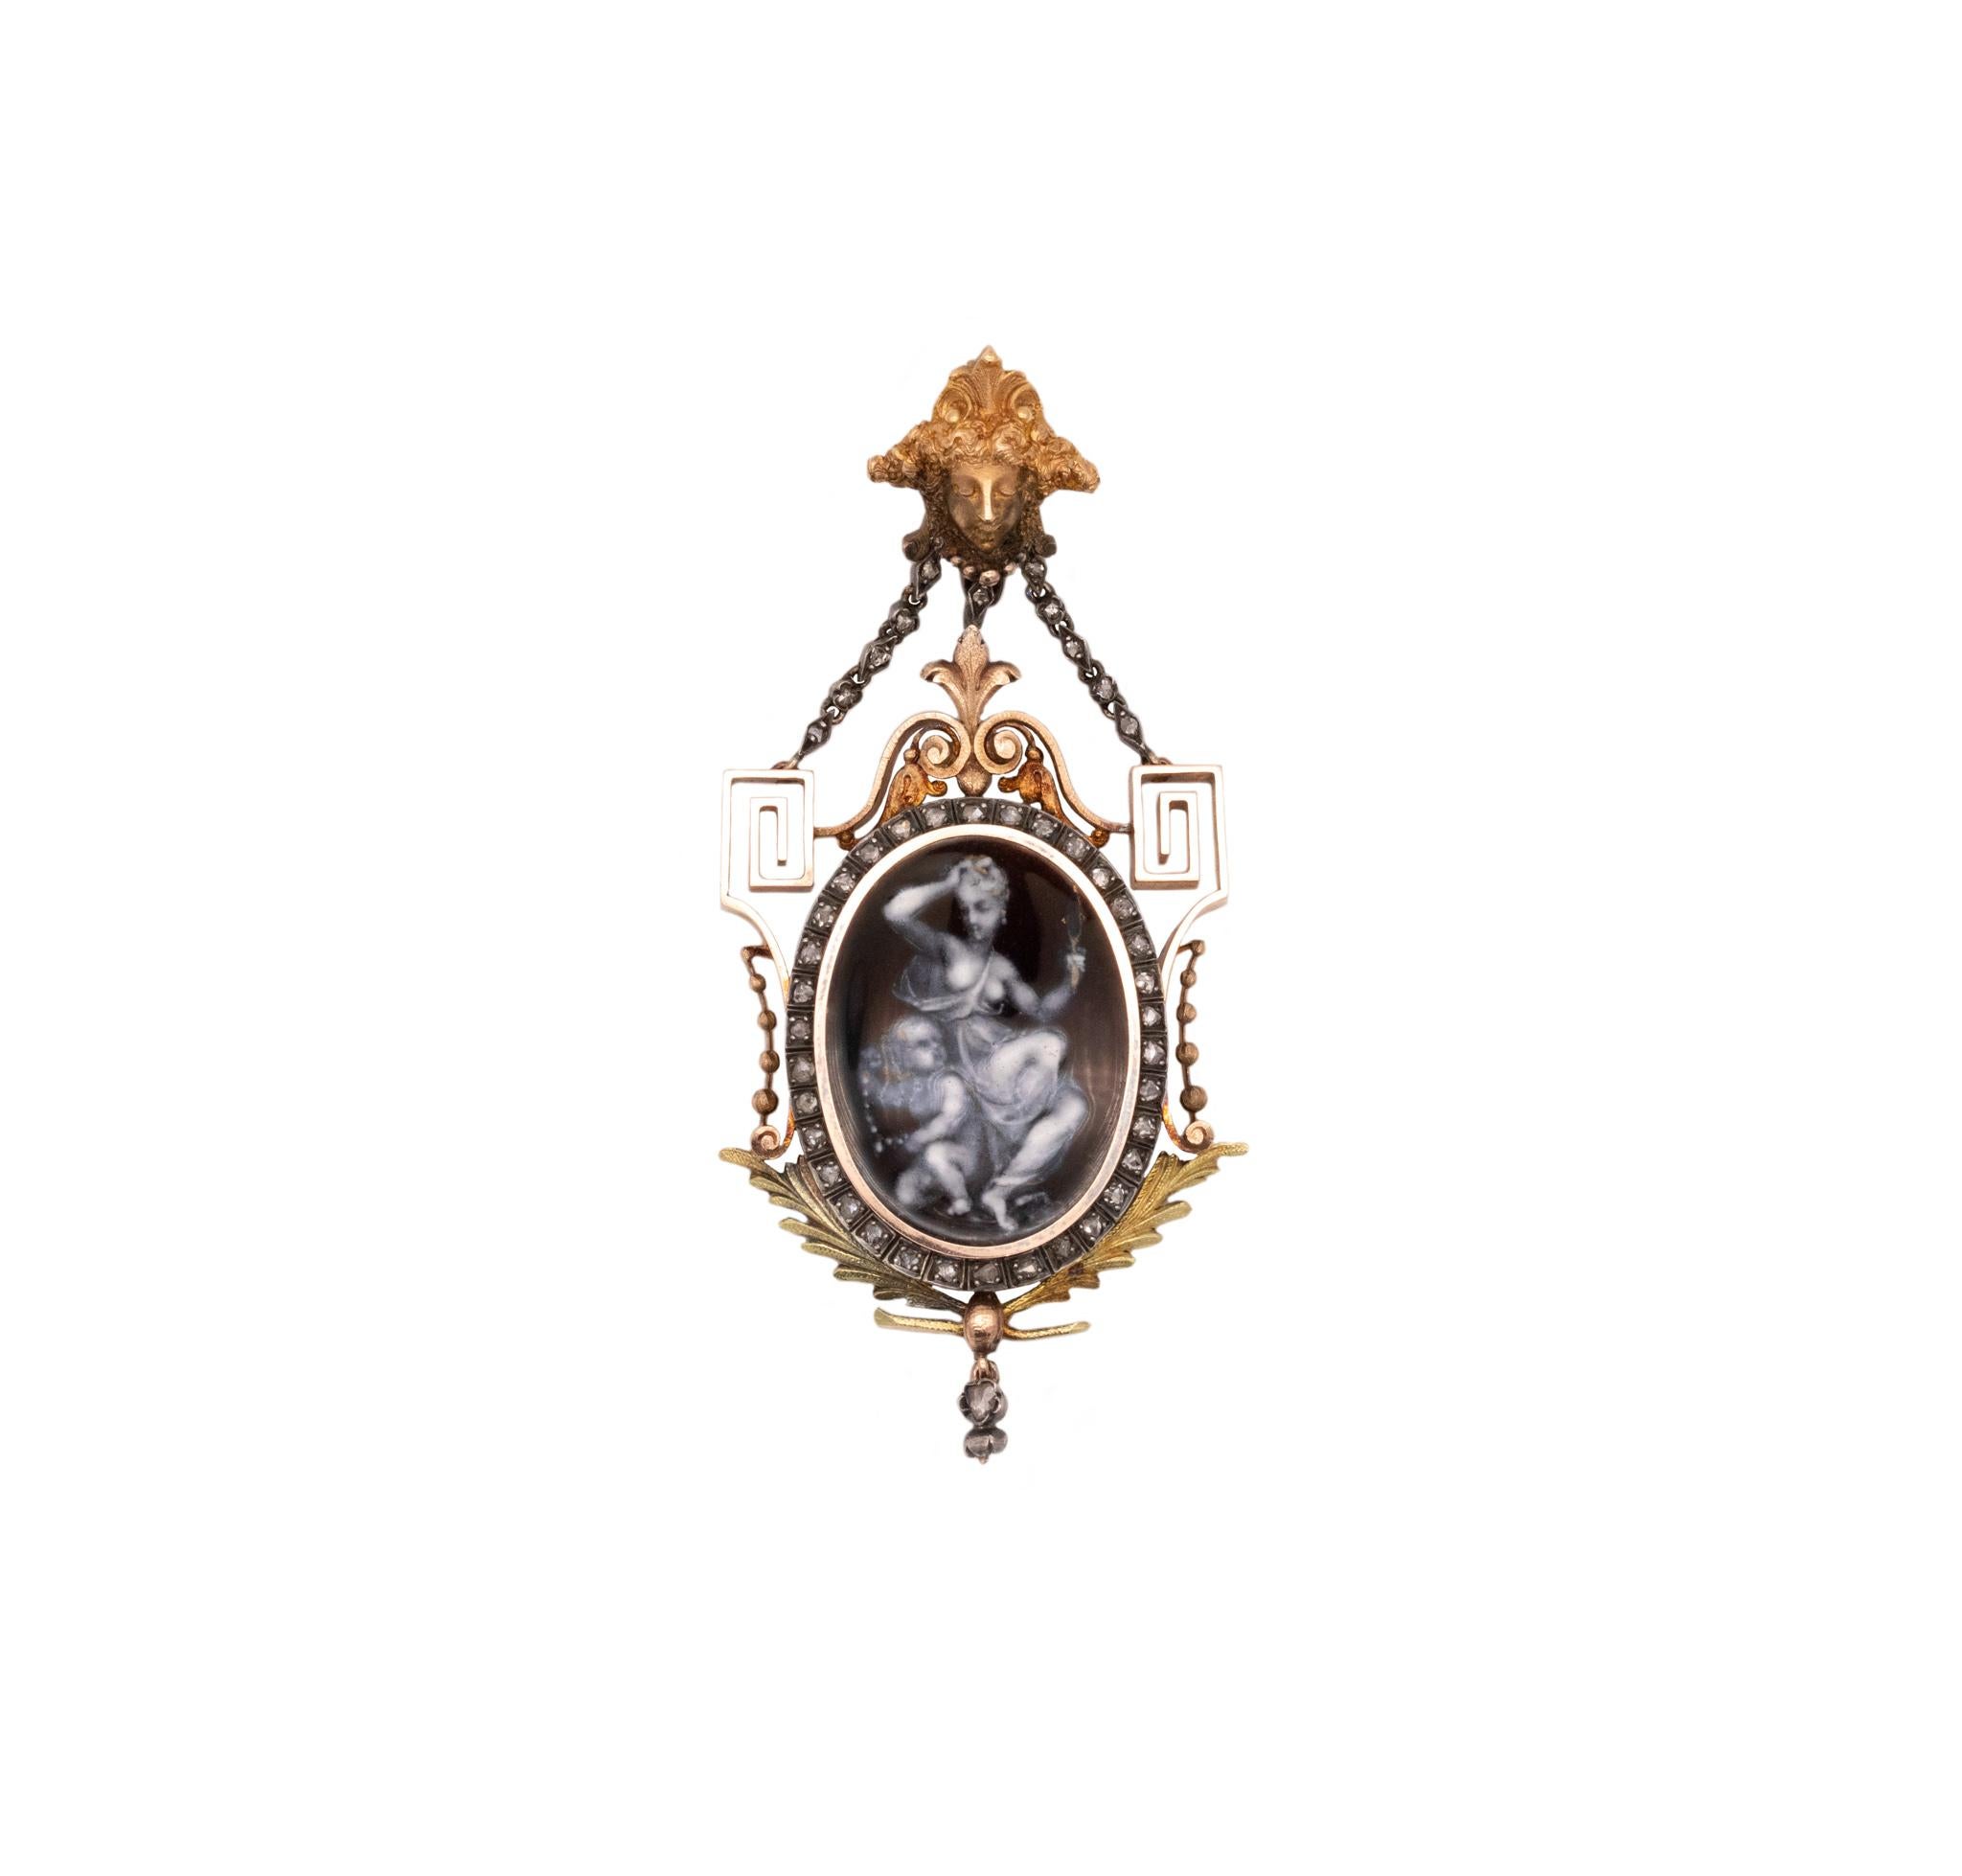 Magnificent Neo-classic pendant-necklace from the Georgian period.

A gorgeous antique pendant-necklace, created in Europe (most probably France) around the 1820's, between the kingdoms of George III (1760-1820) and George IV (1820-1830). It was